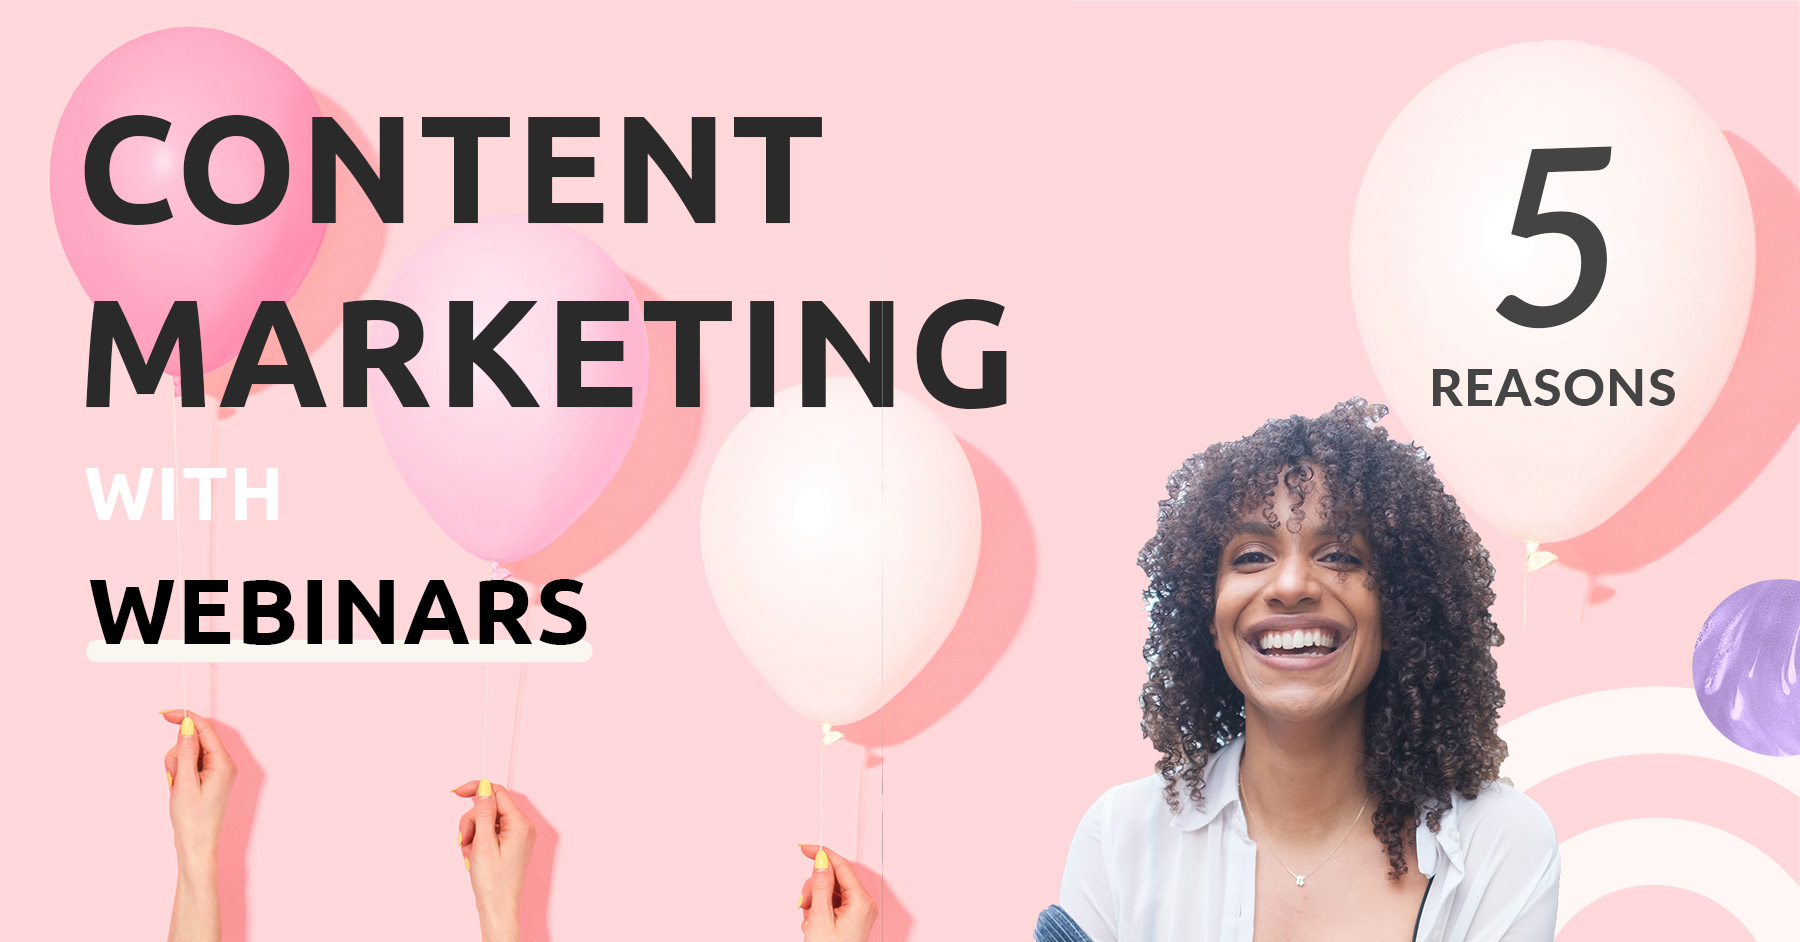 Webinars are a crucial part, or should be a crucial part of your content marketing strategy as a brand. In this article, we will explore the top 5 reasons why you should use webinars as one of the driving forces behind your content marketing efforts. Let’s dive in!
